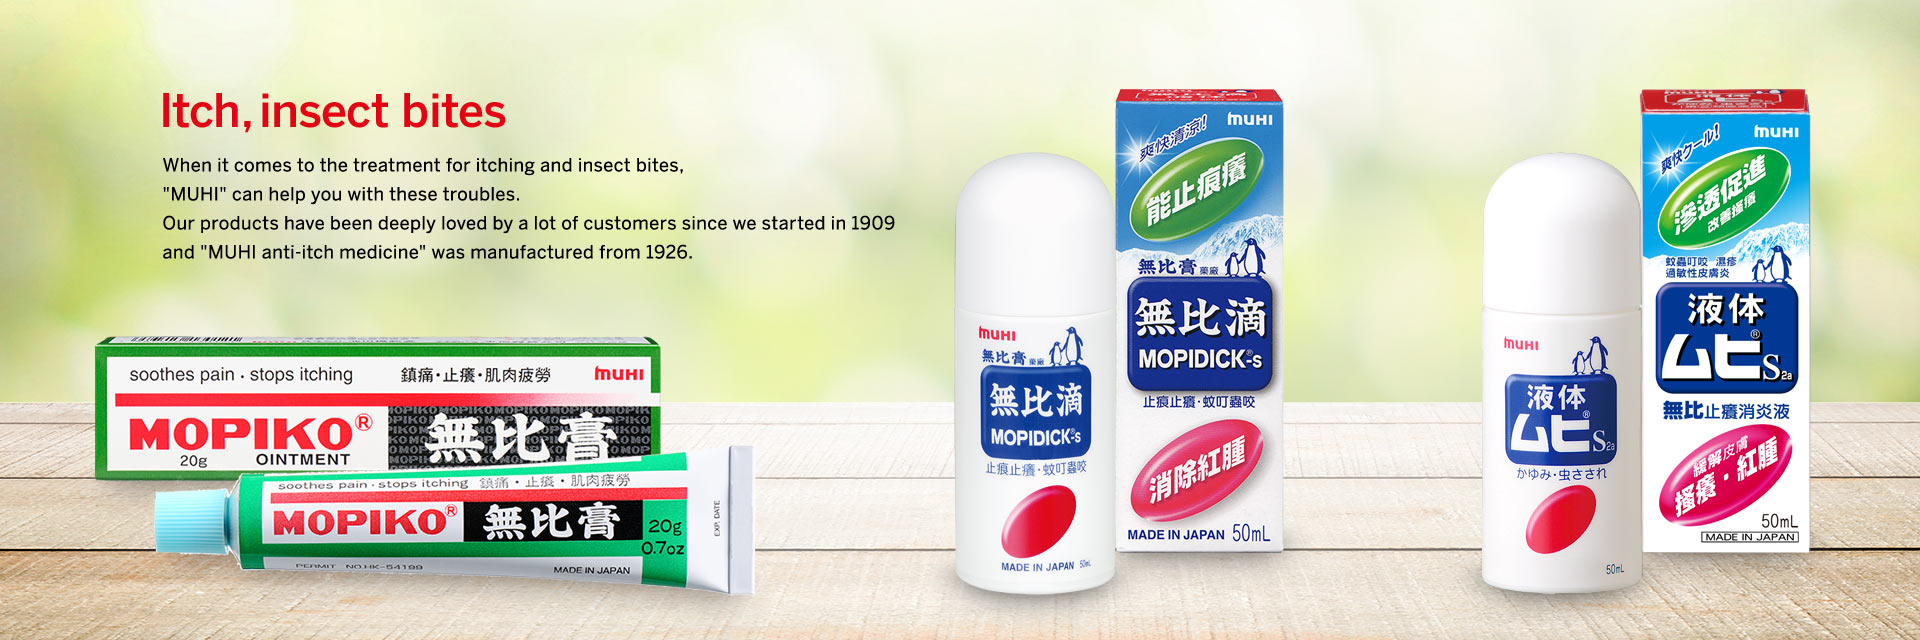 Itch,insect bites When it comes to the treatment for itching and insect bites, "MUHI" can help you with these troubles. Our products have been deeply loved by a lot of customers since we started in 1909 and "MUHI anti-itch medicine" was manufactured from 1926.